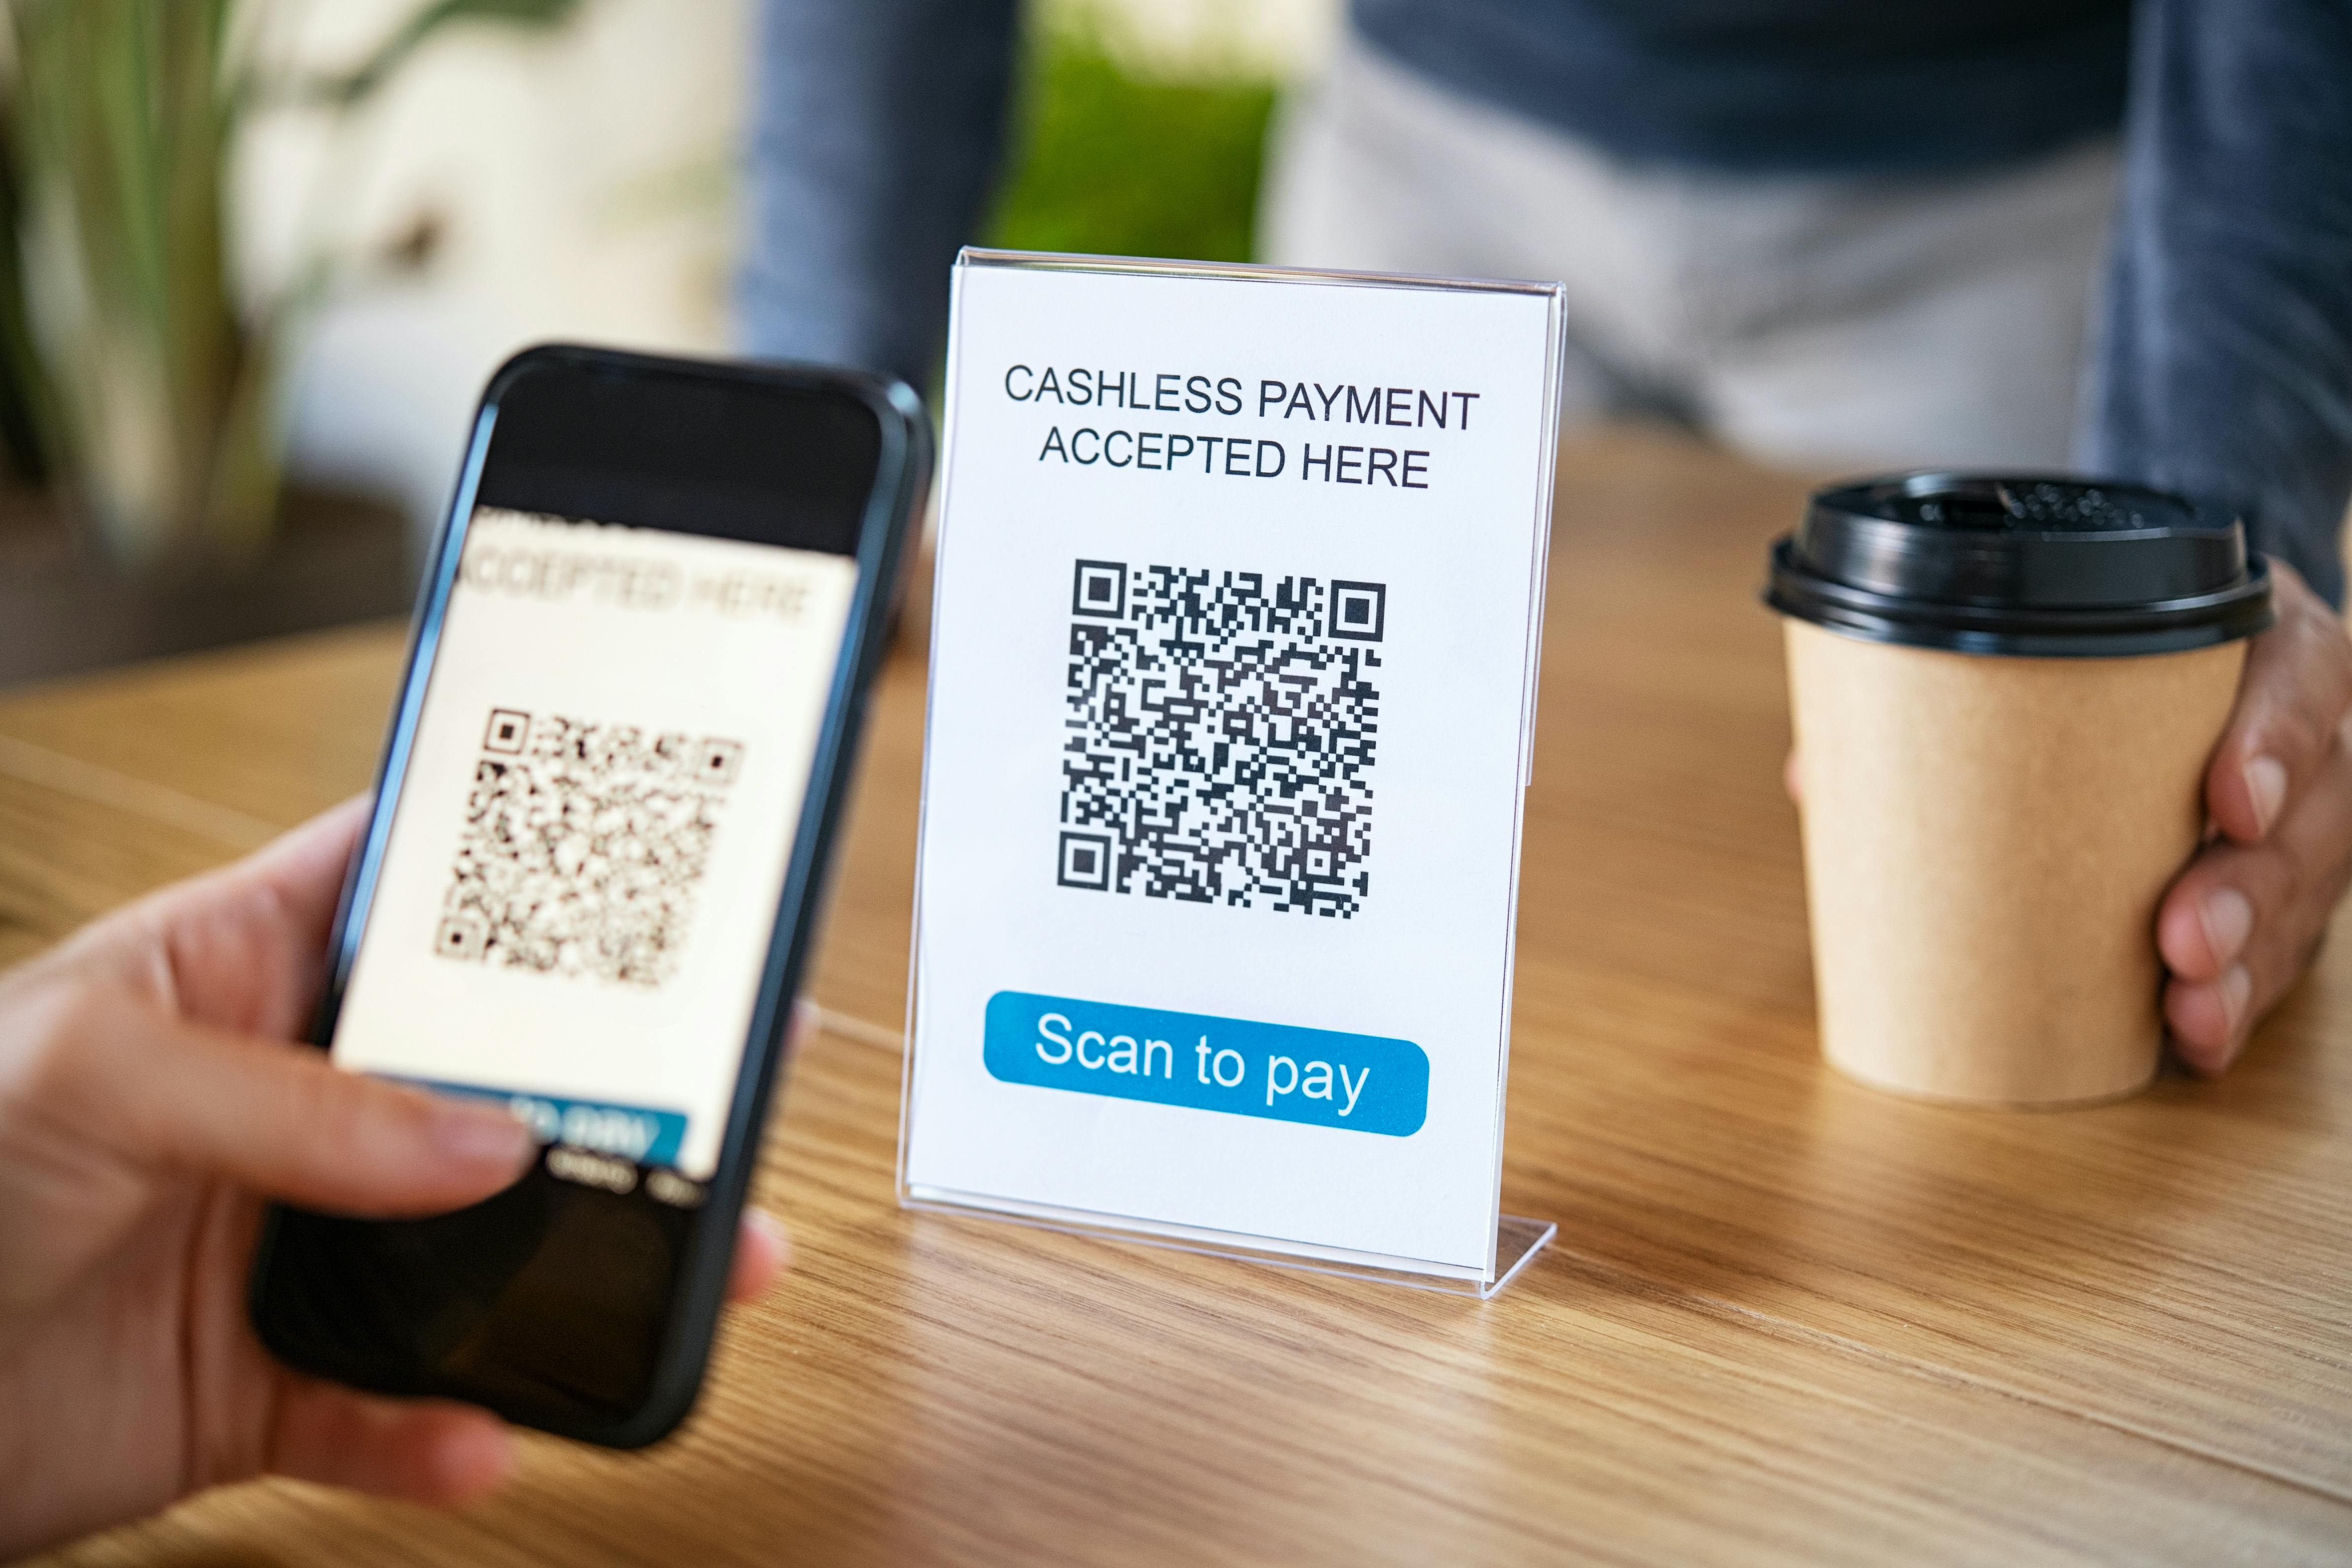 Qr code digital payment at coffee shop